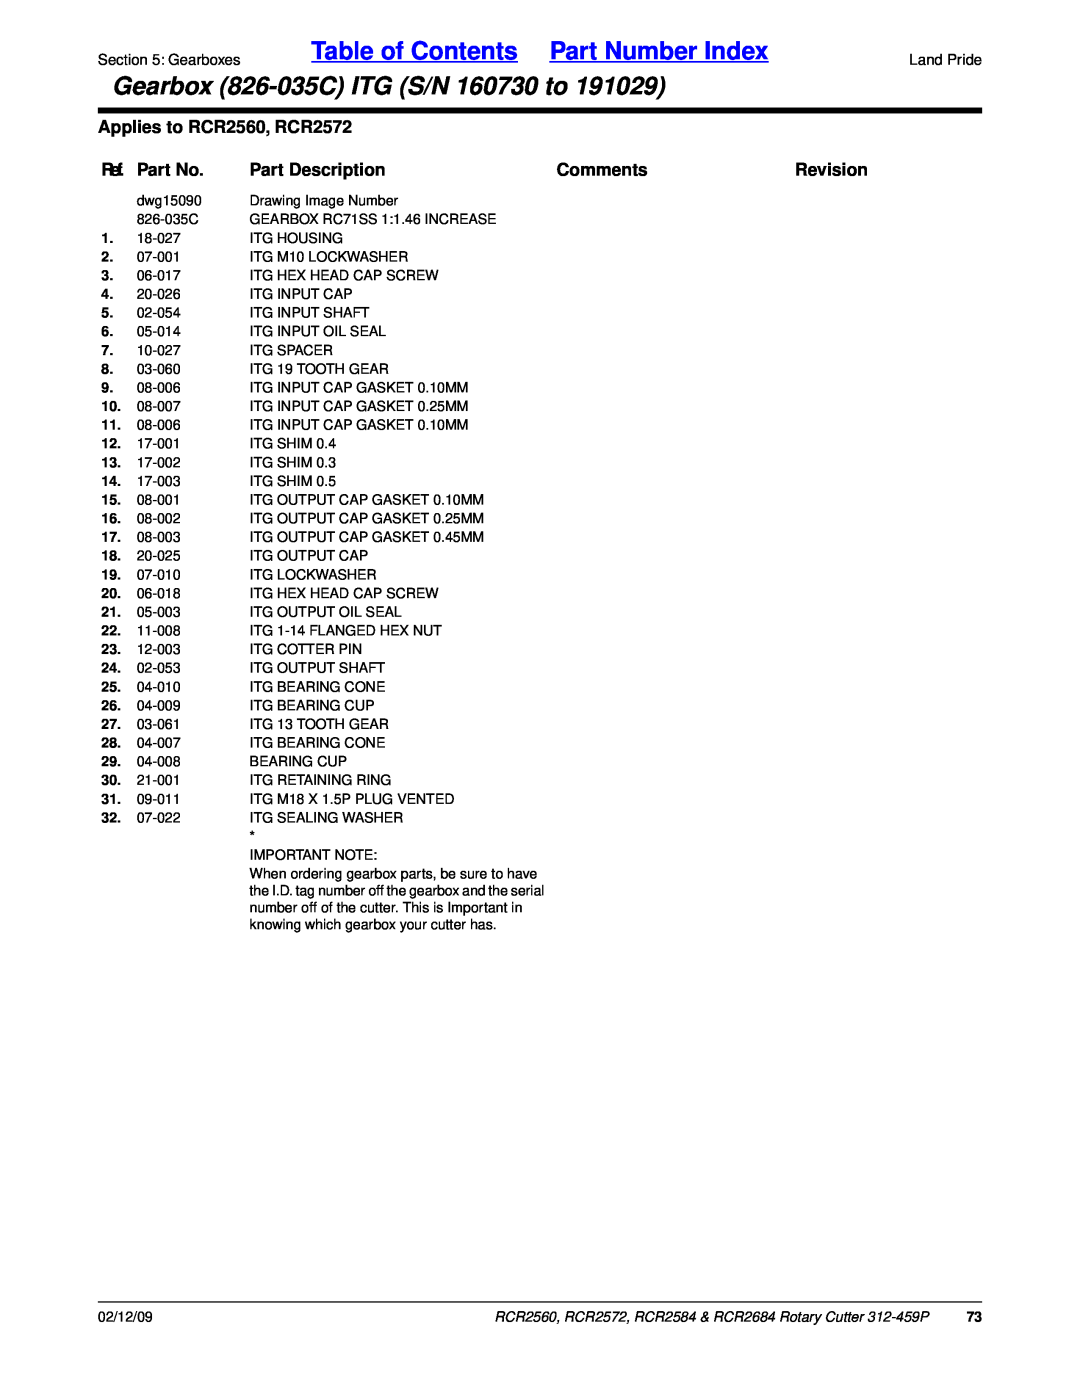 Land Pride RCR2584 Table of Contents Part Number Index, Gearbox 826-035CITG S/N 160730 to, Applies to RCR2560, RCR2572 